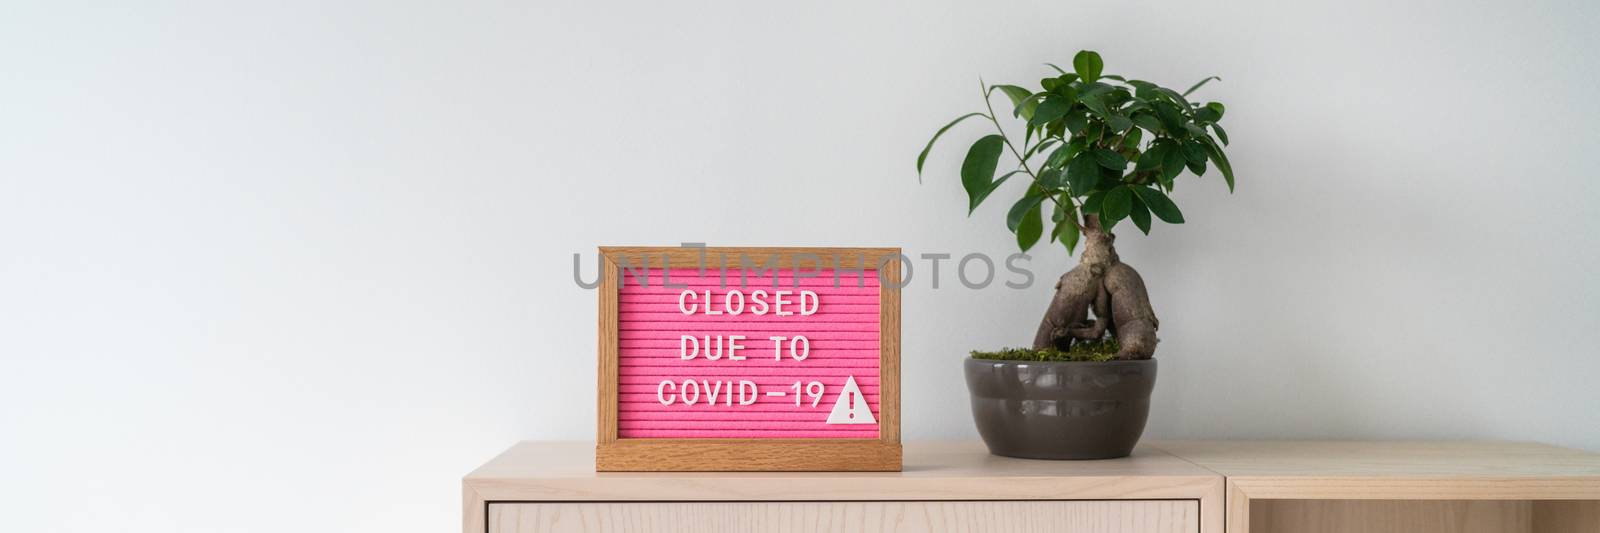 Closed sign at retail store business banner. Pink cute felt letter board on shelf with plant with notice of closure due to COVID-19 small businesses going bankrupt amidst coronavirus.